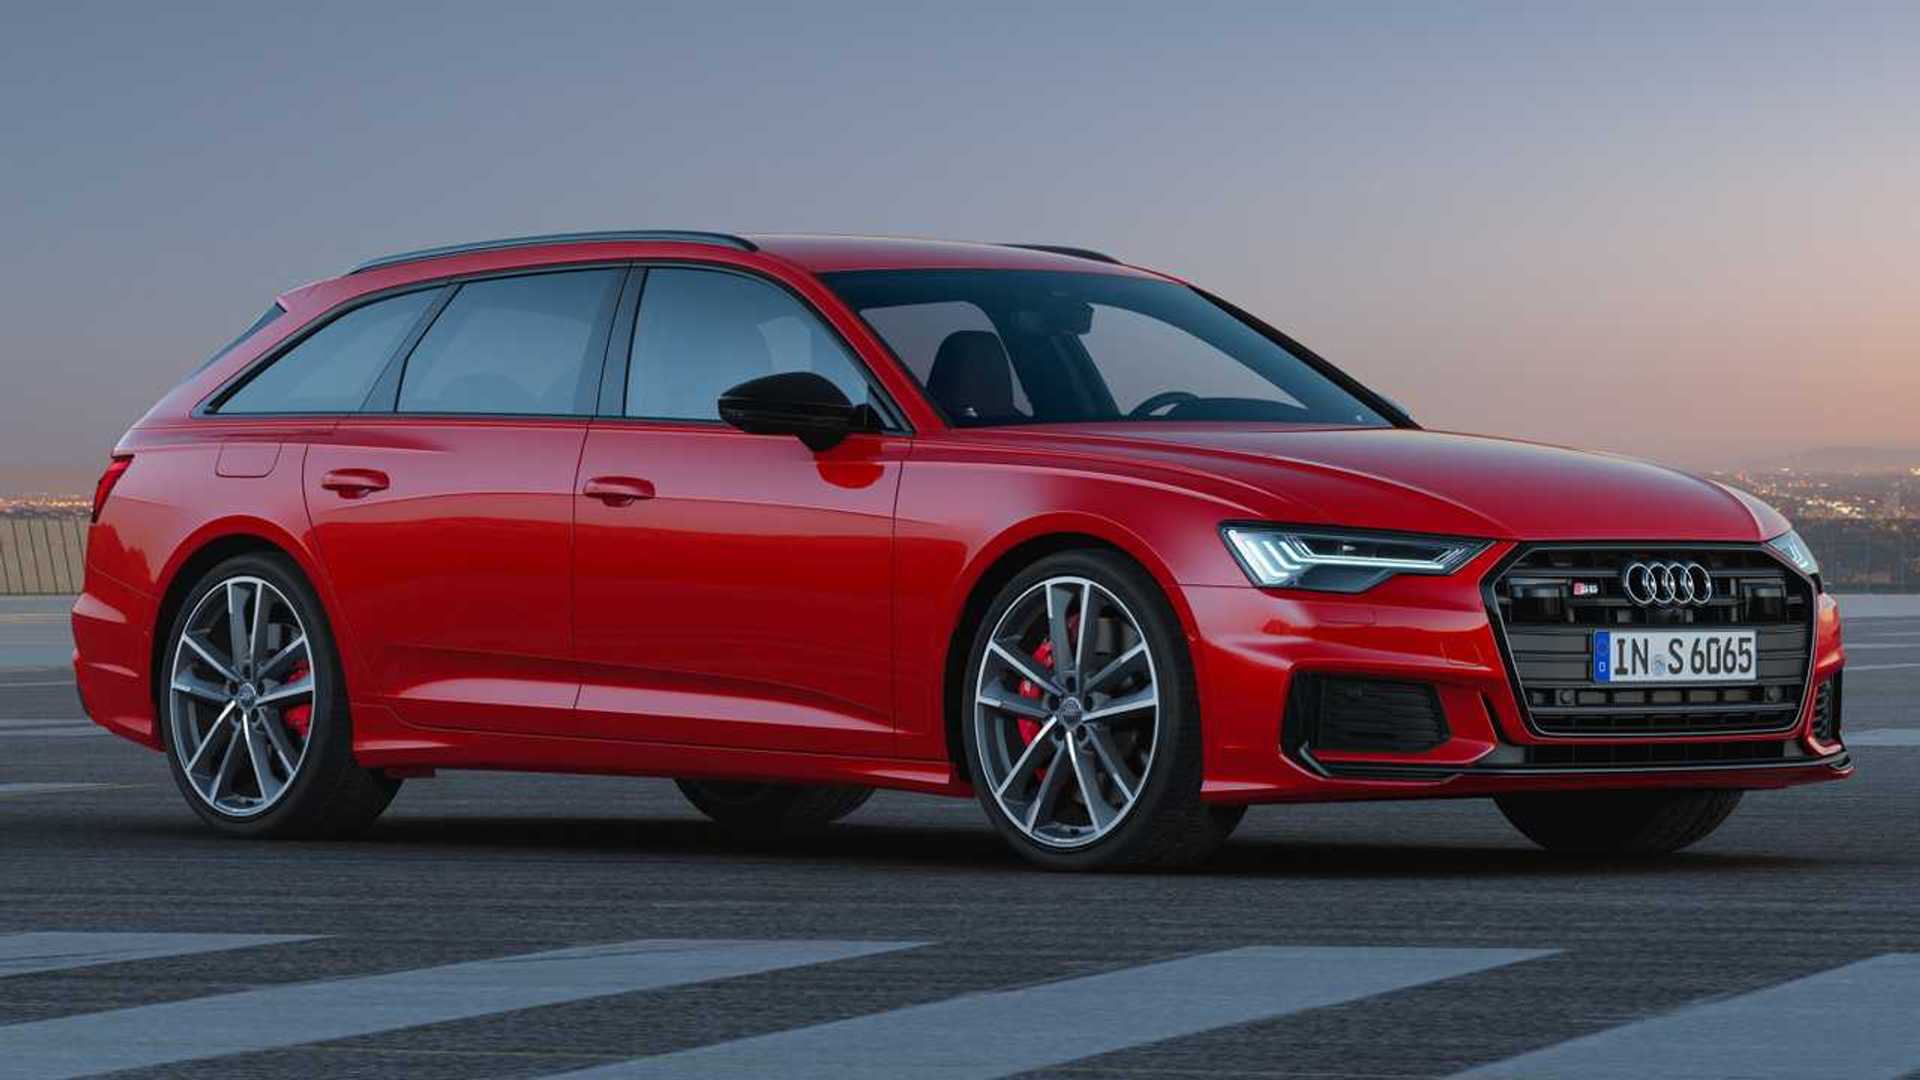 2020 Audi S6 And S7 Revealed: TDI For Europe; TFSI For U.S.